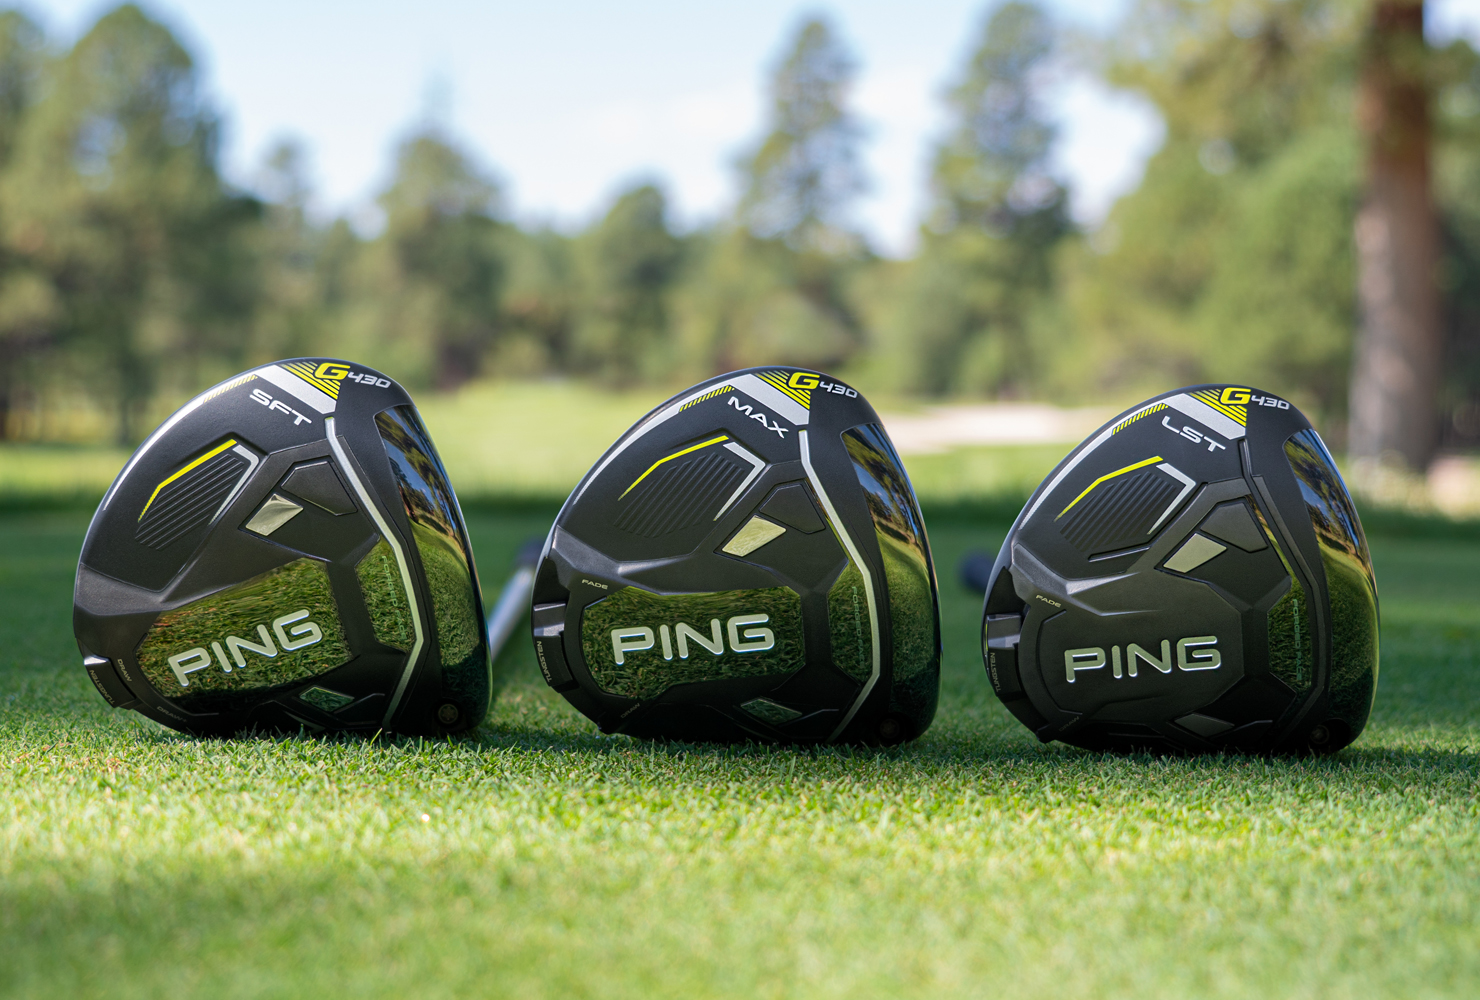 PING G430 Drivers - The Hackers Paradise